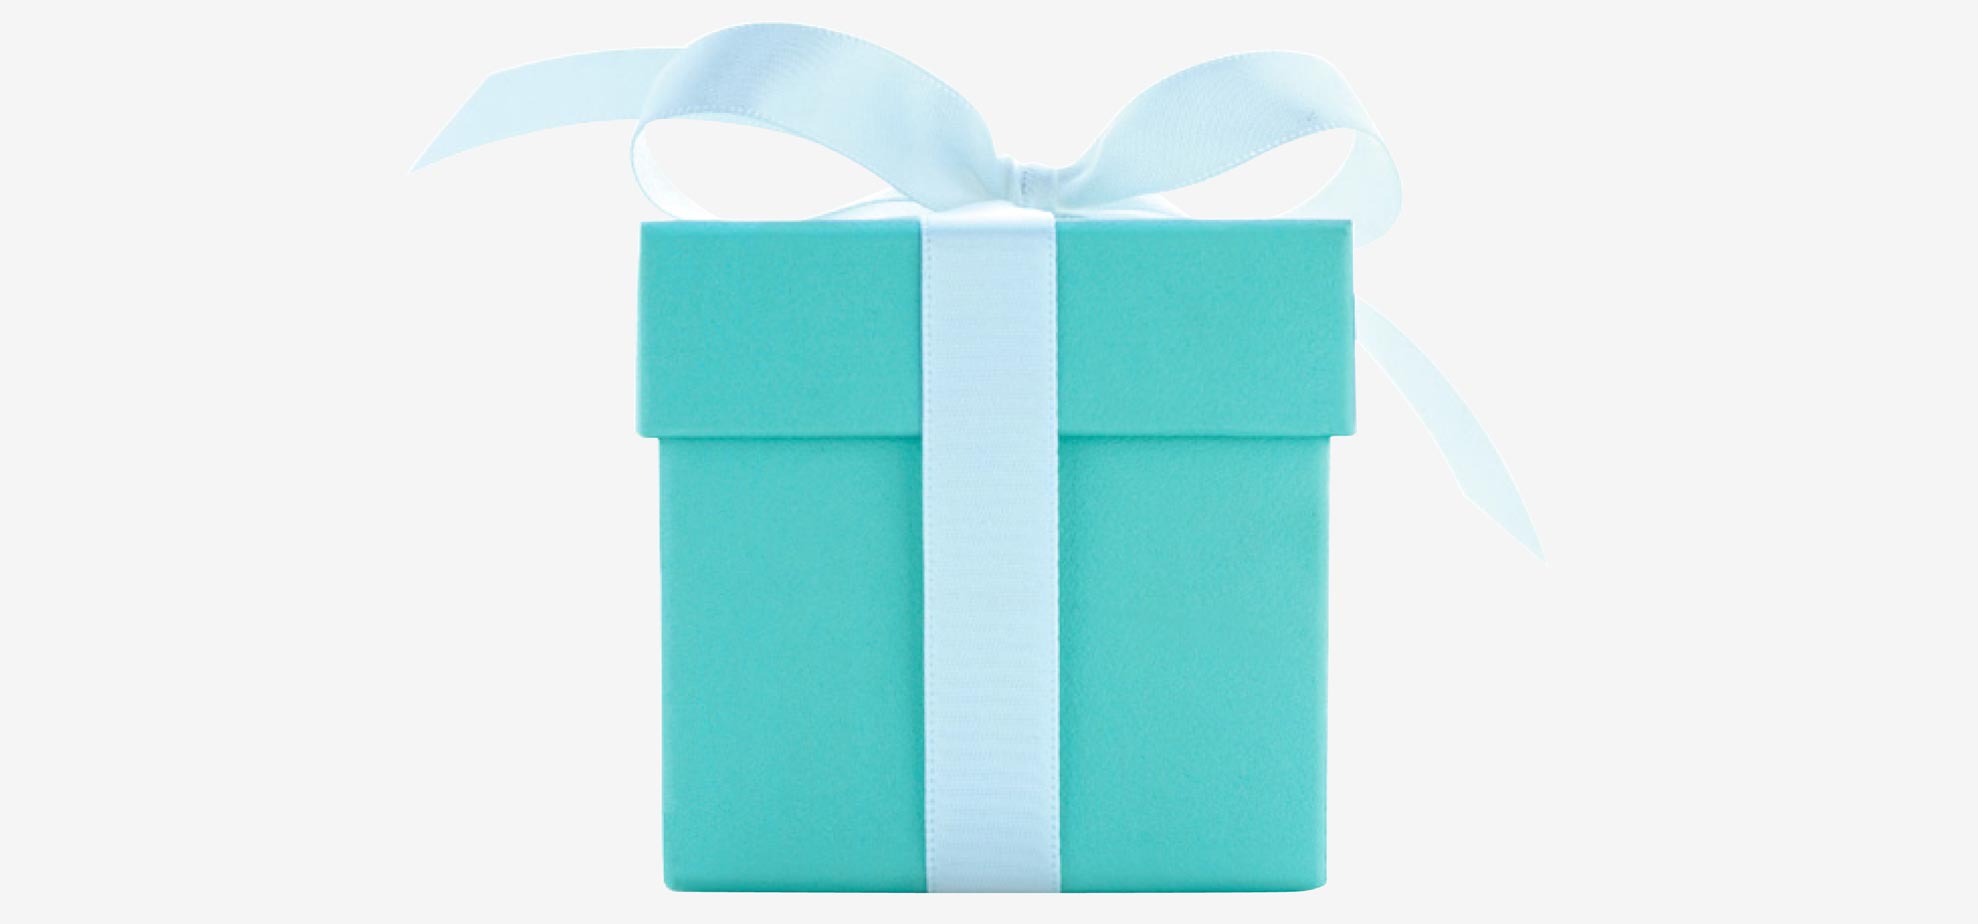 Crowned with a white ribbon, the Tiffany Blue Box is an international ...